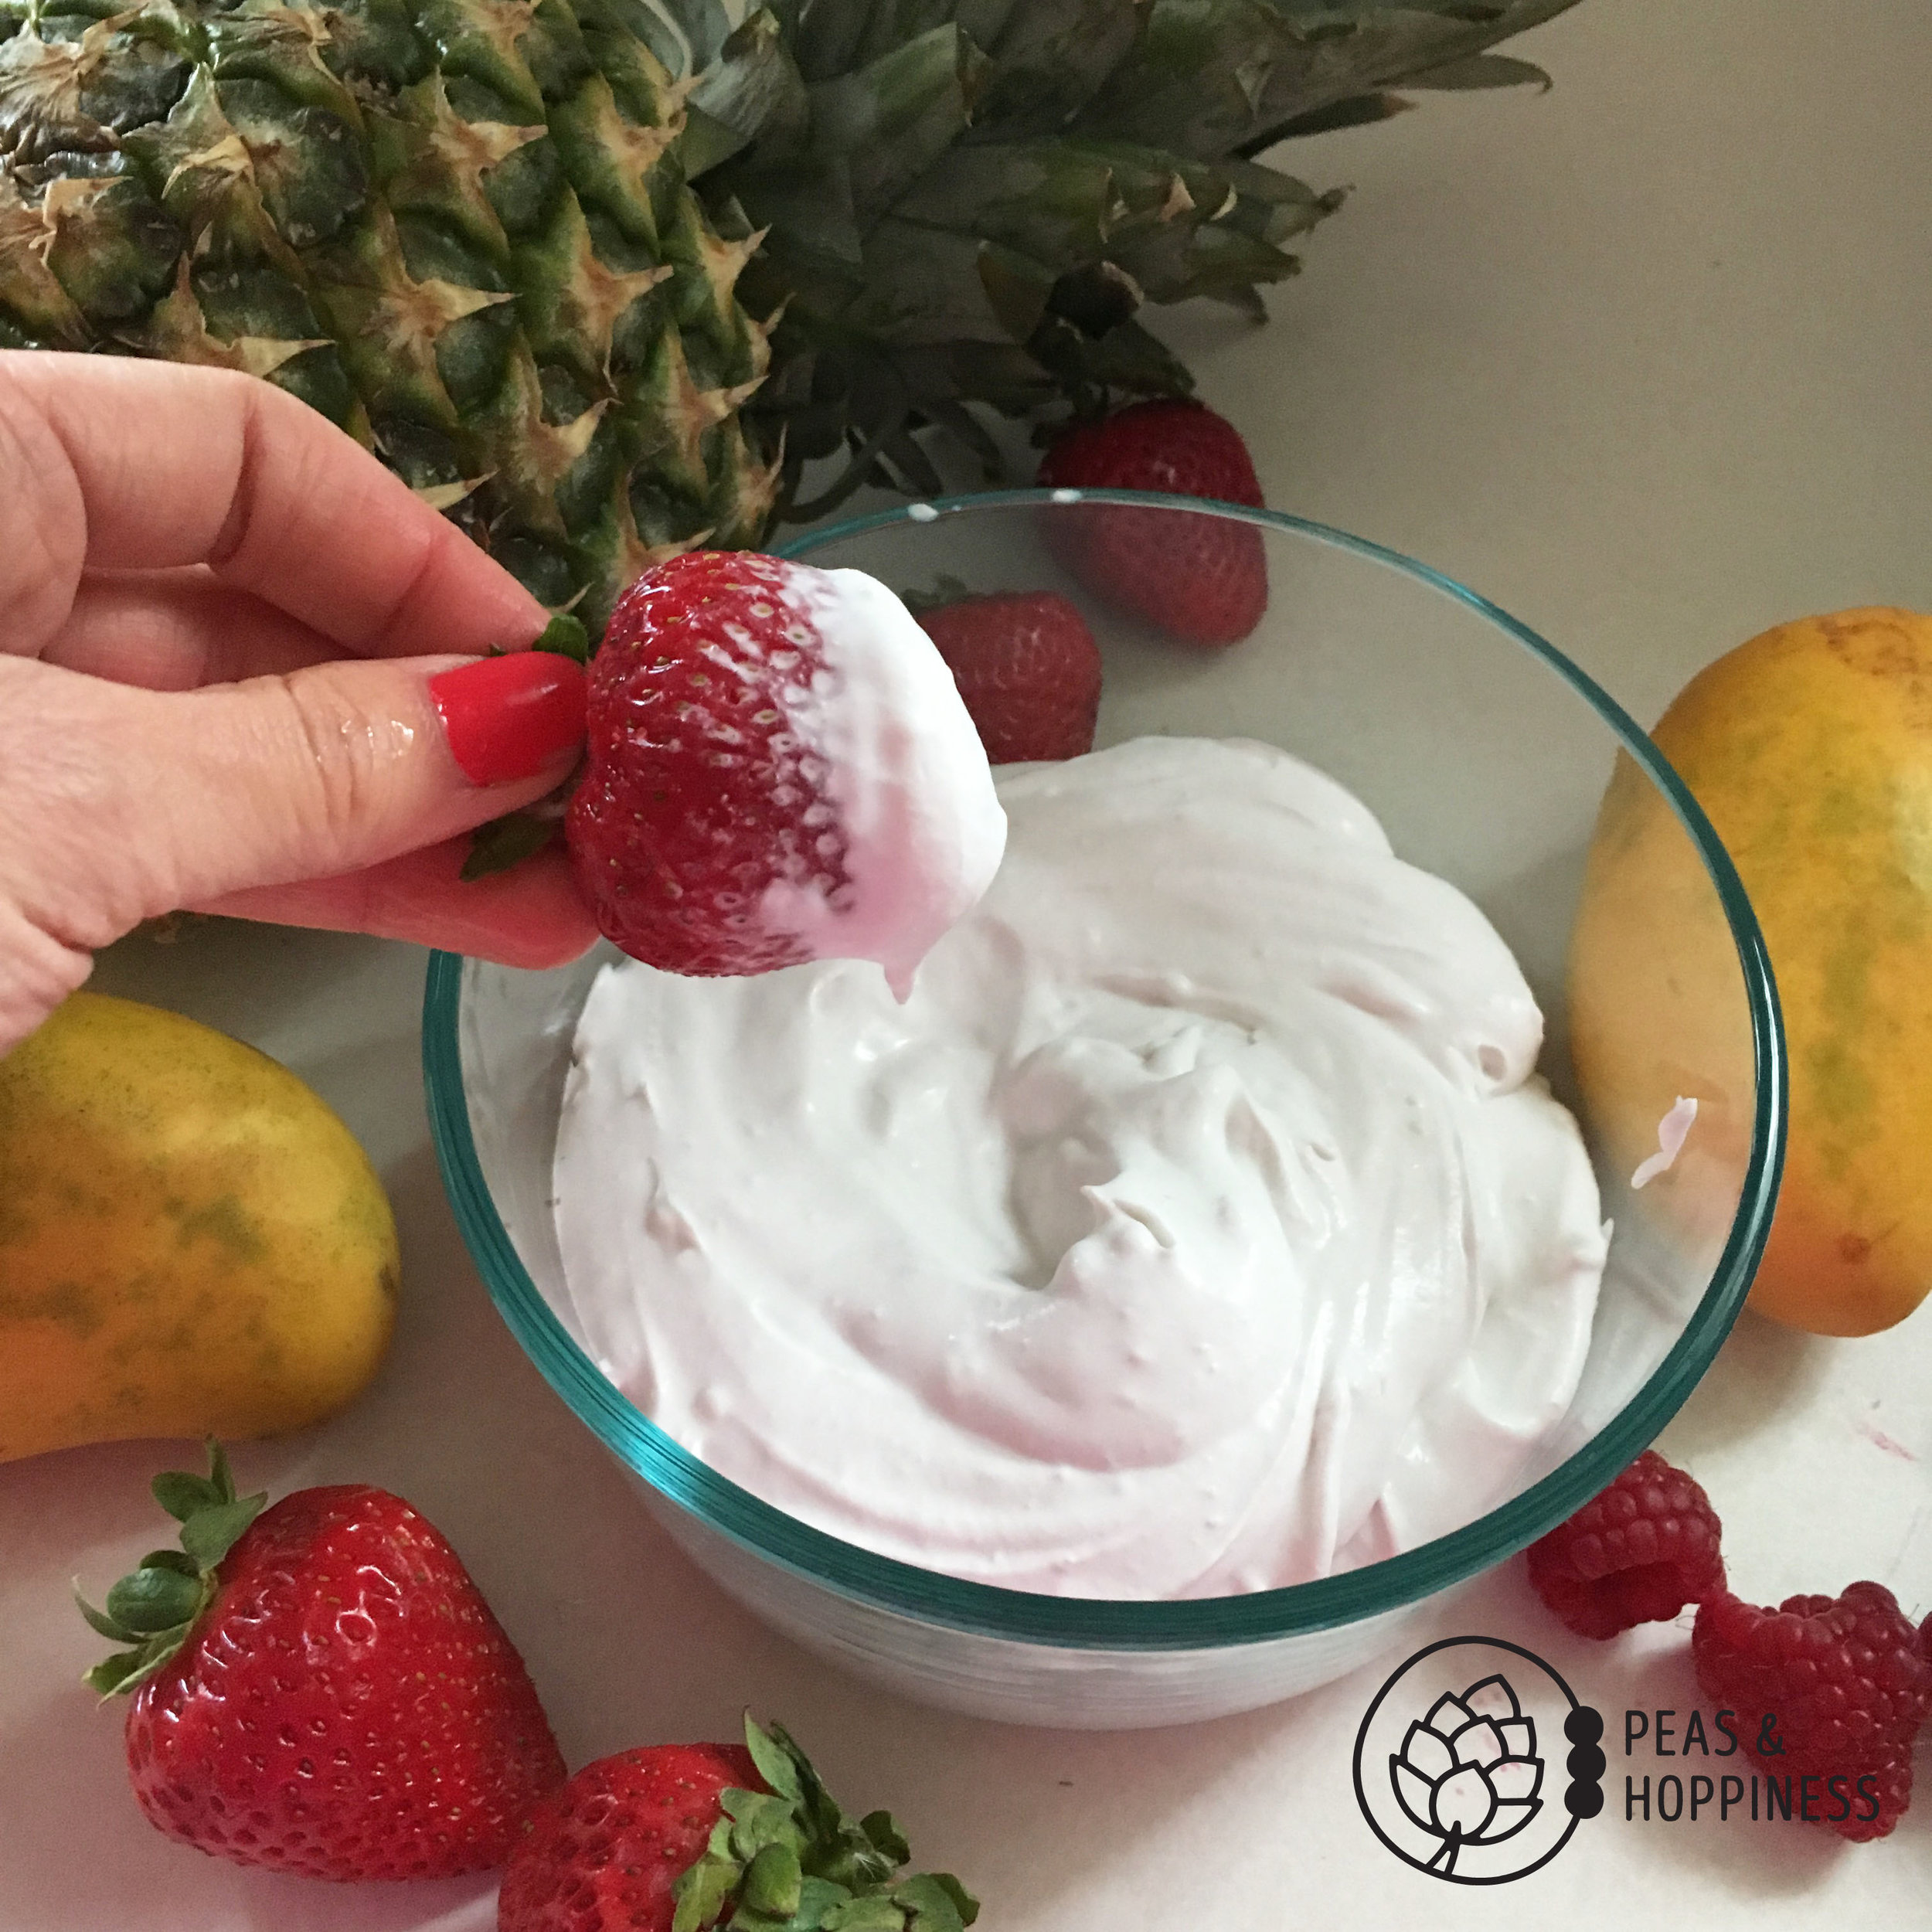 Dairy Free Pina Colada Fruit Dip from Peas and Hoppiness - www.peasandhoppiness.com